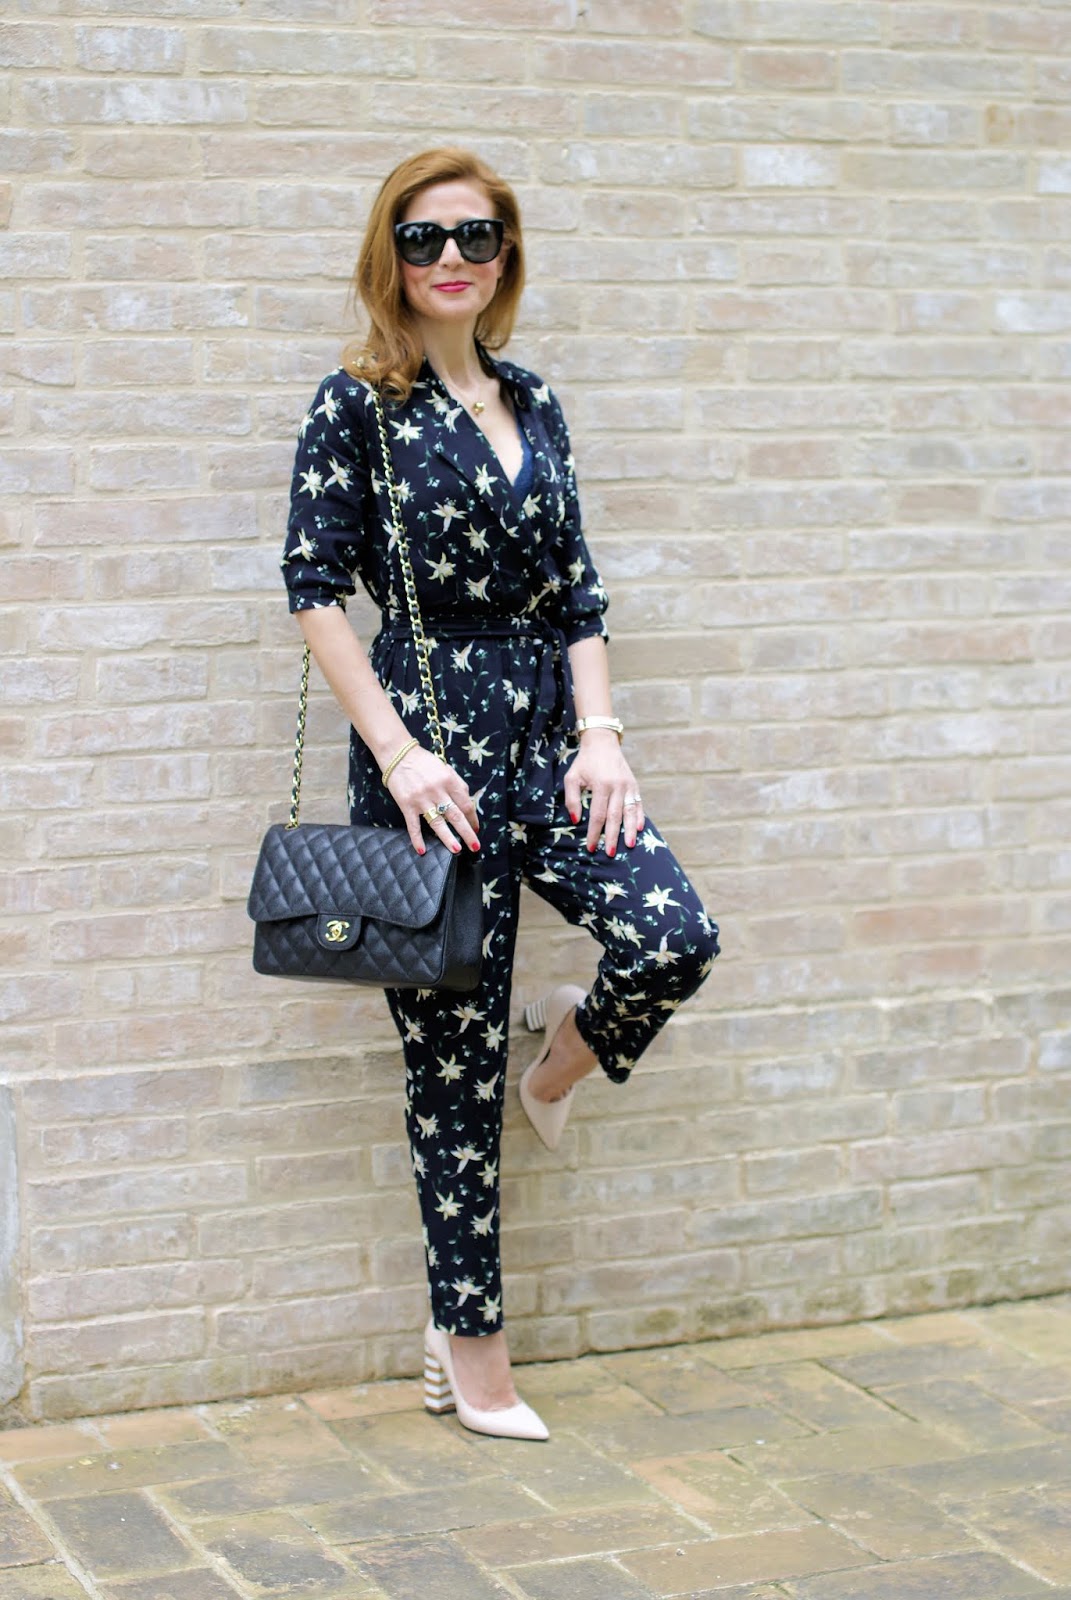 Floral jumpsuit, Chanel 2.55 and Pollini shoes on Fashion and Cookies fashion blog, fashion blogger style